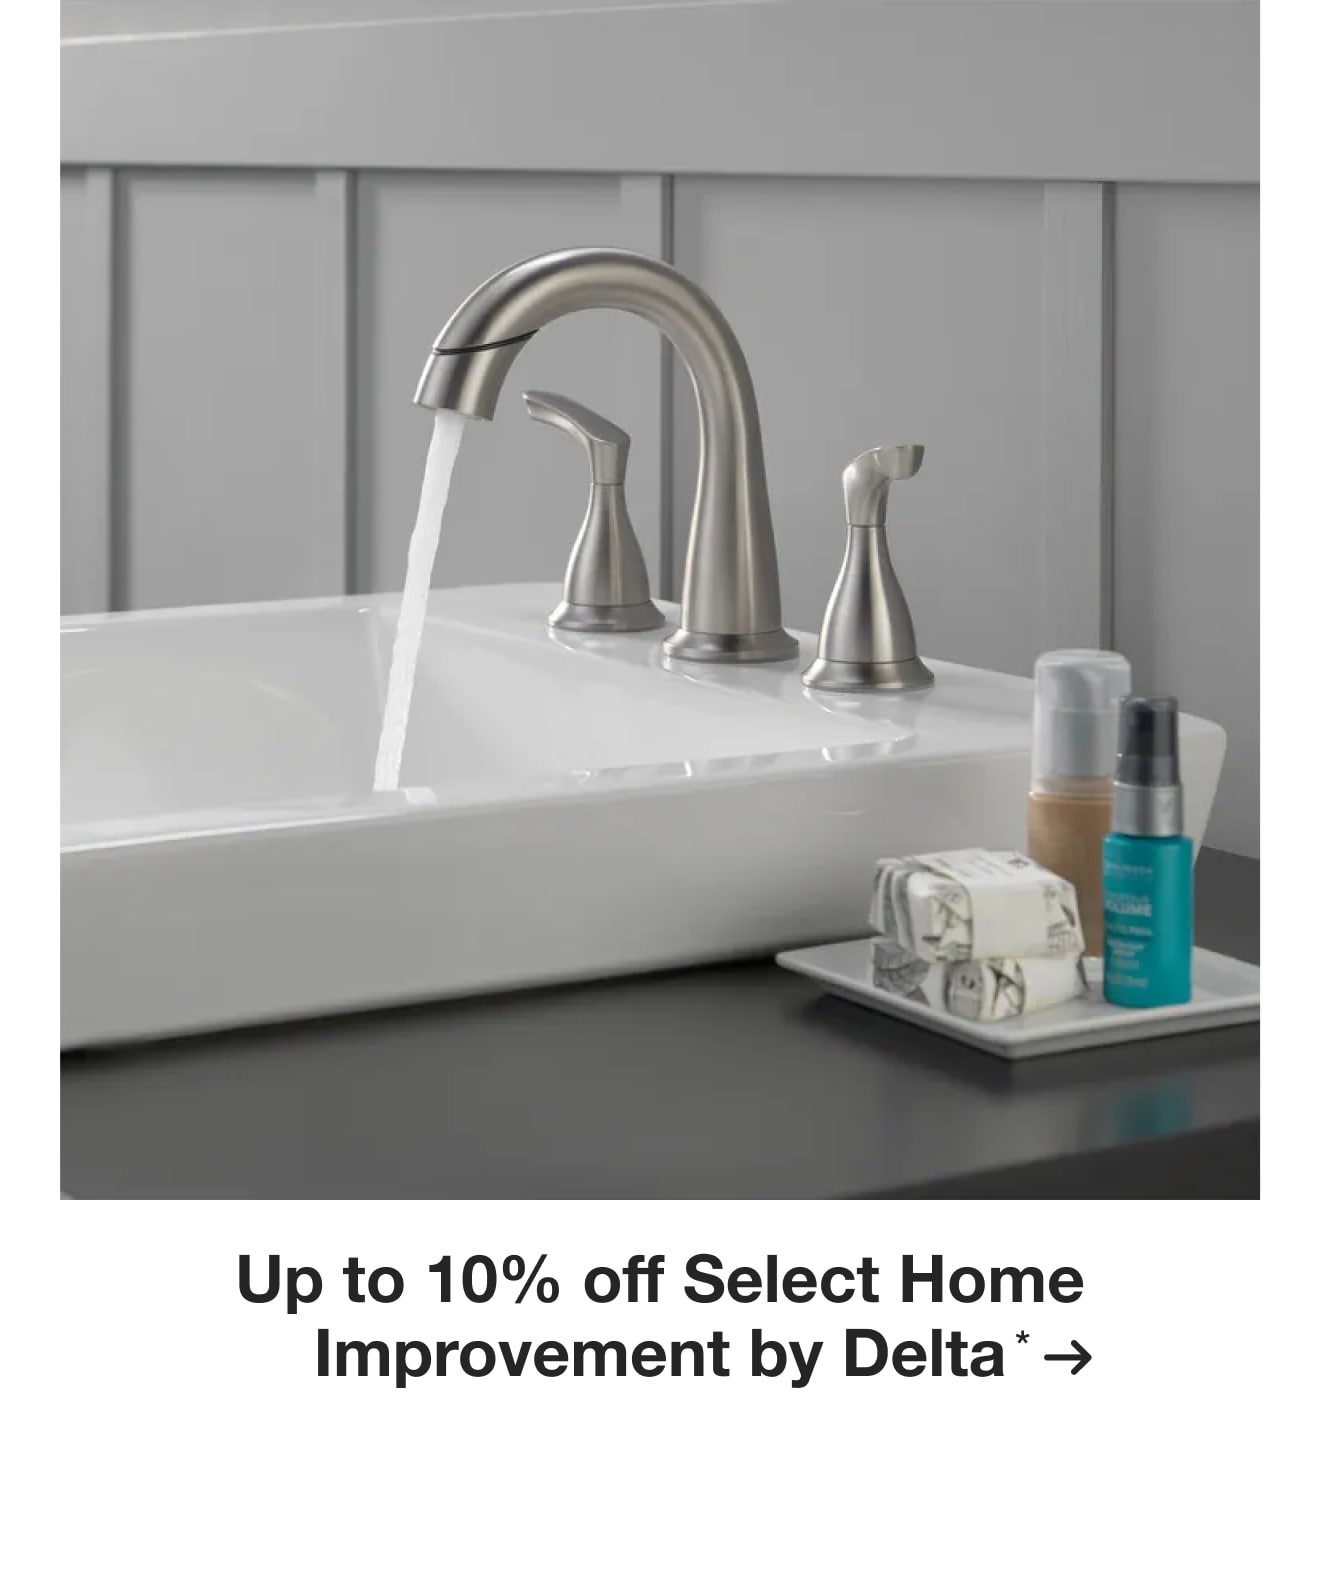 Up to 10% off Select Home Improvement by Delta*